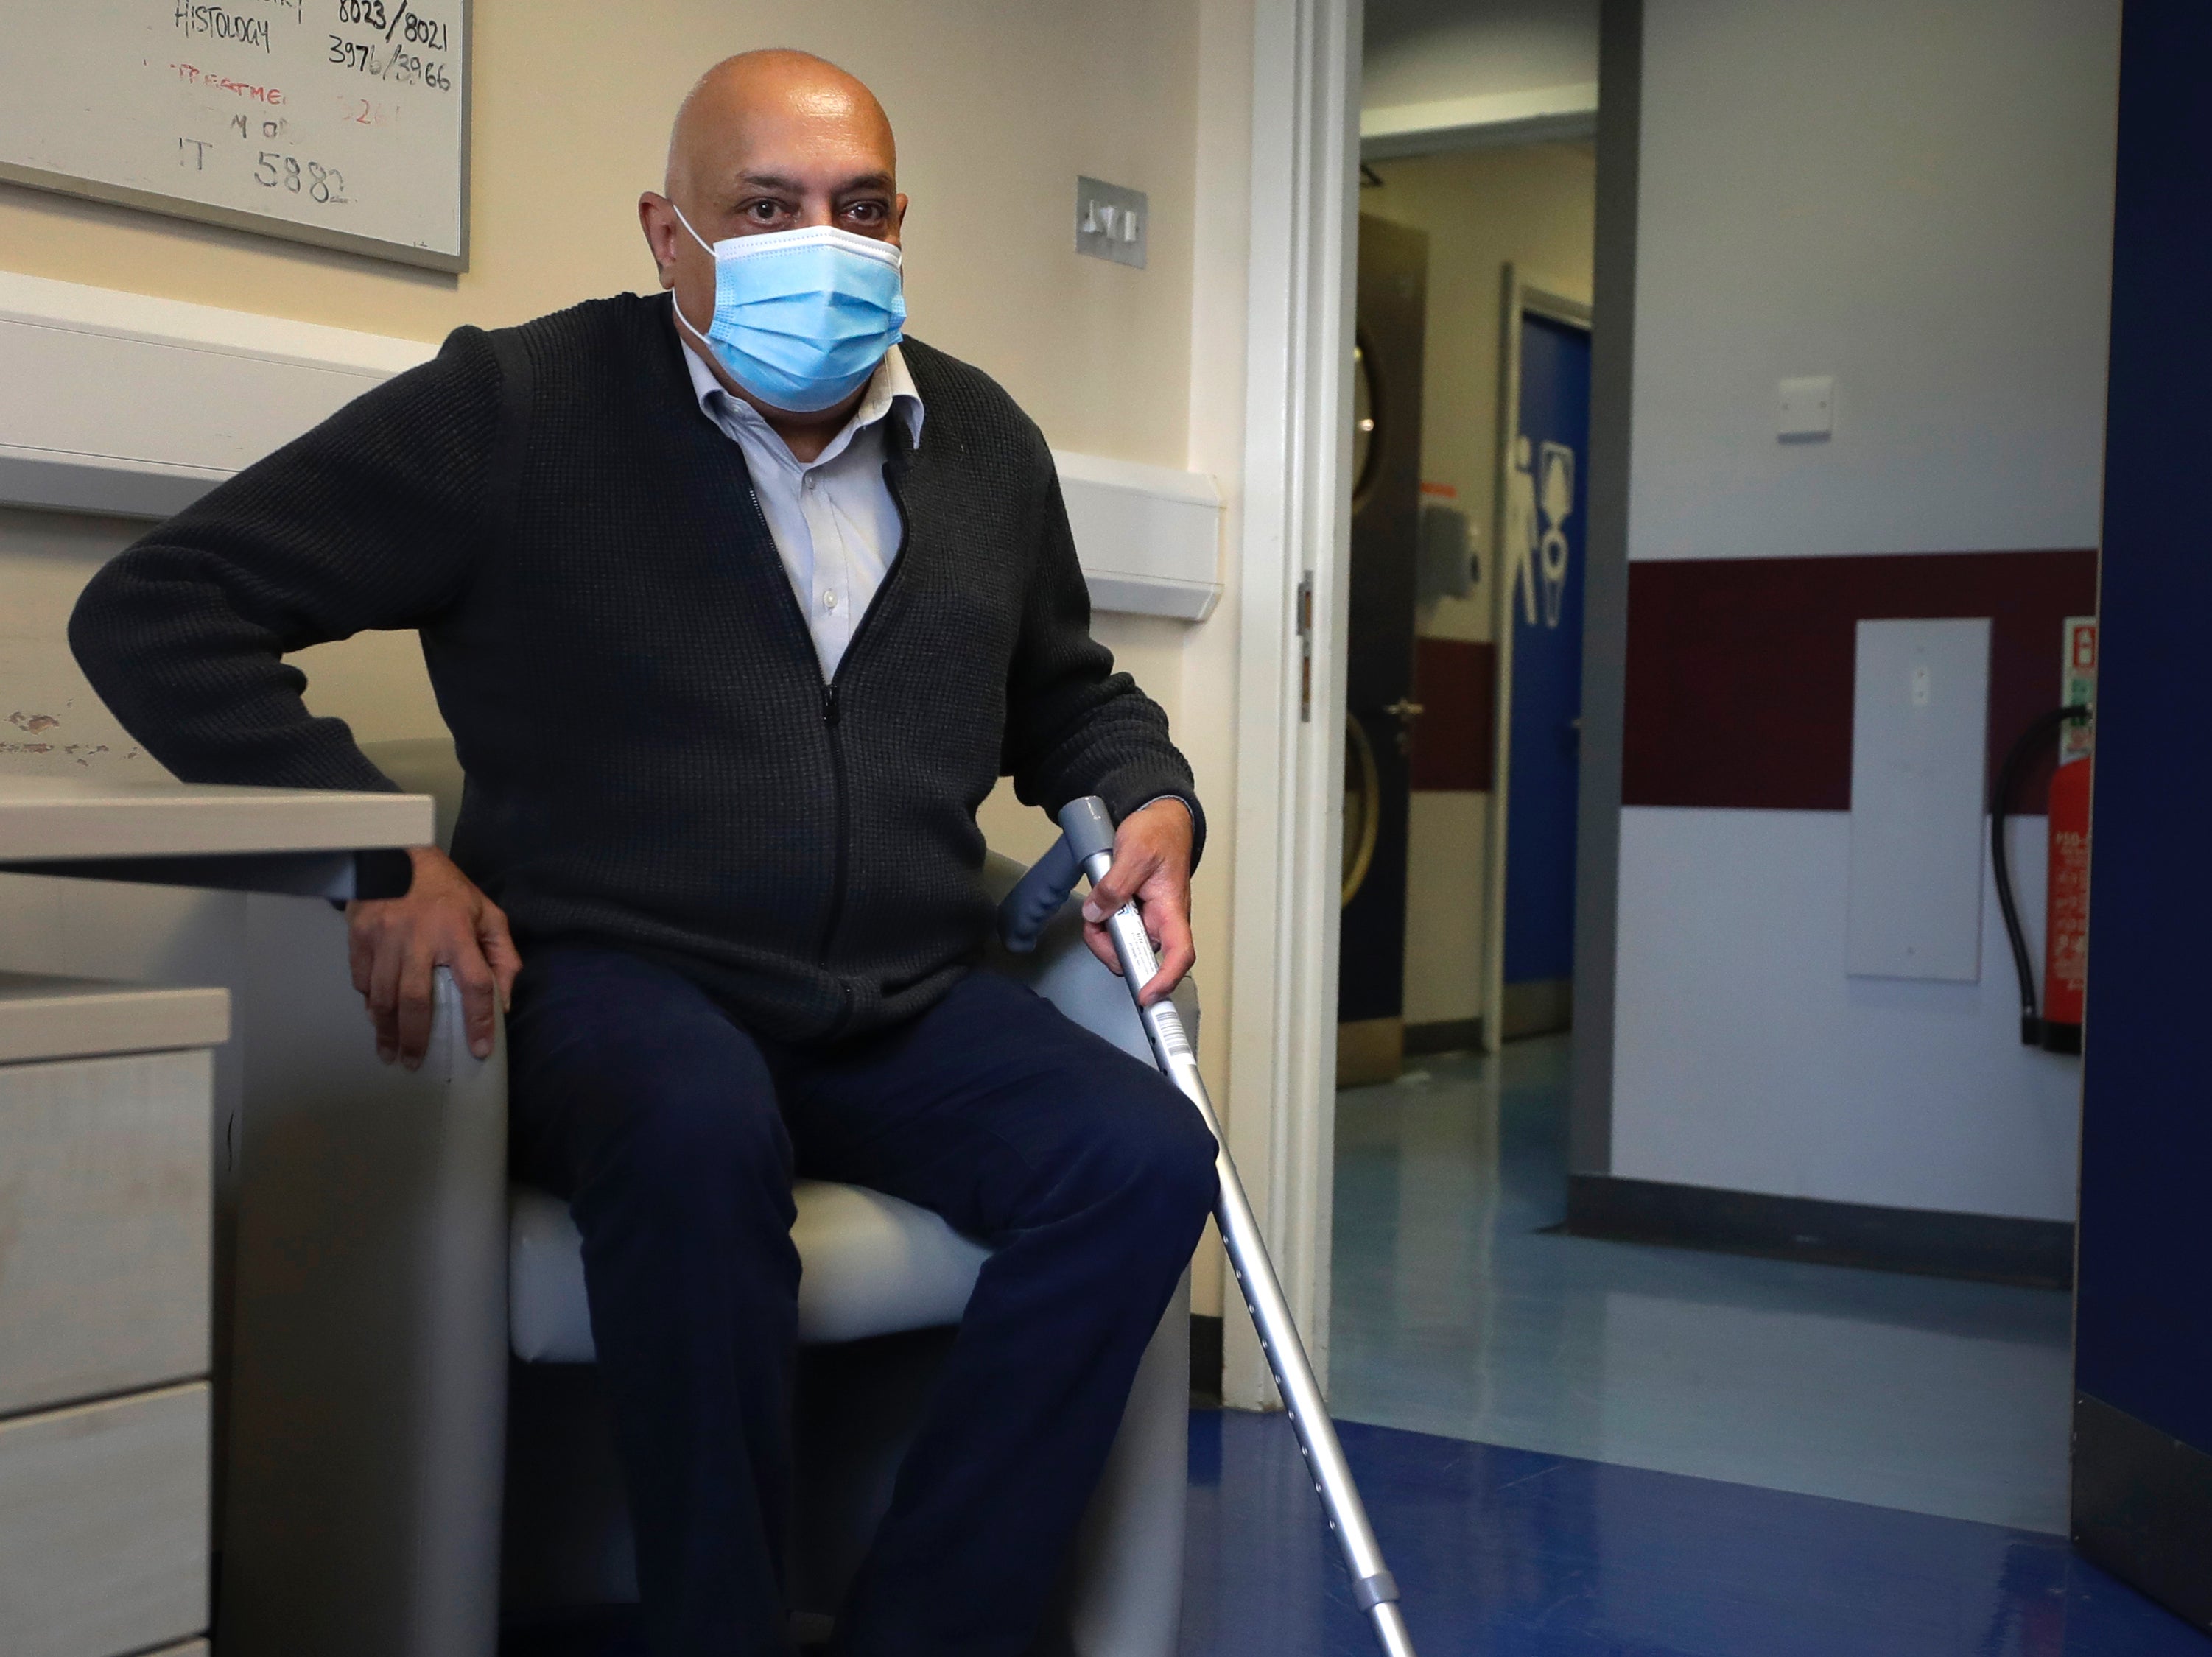 Long Covid patient Rohit Patel takes a seat during a visit to the Long Covid Clinic at King George Hospital in Ilford, London